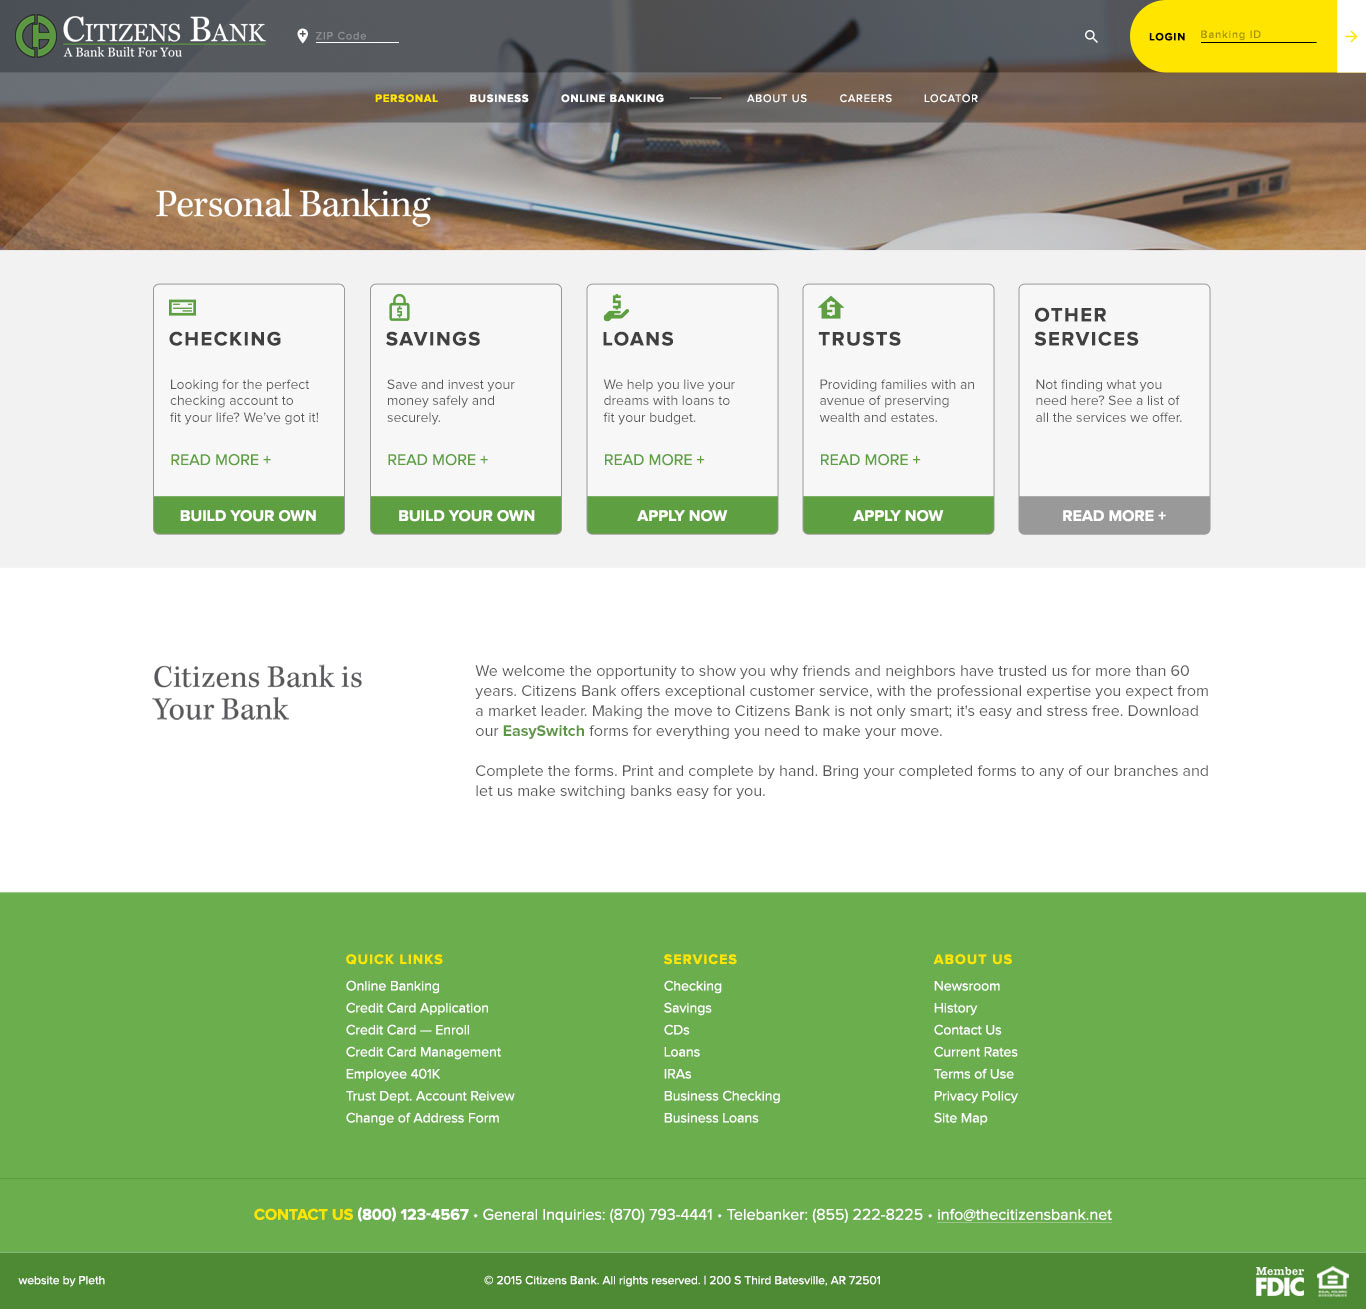 Citizens Bank website, Personal Banking interior page